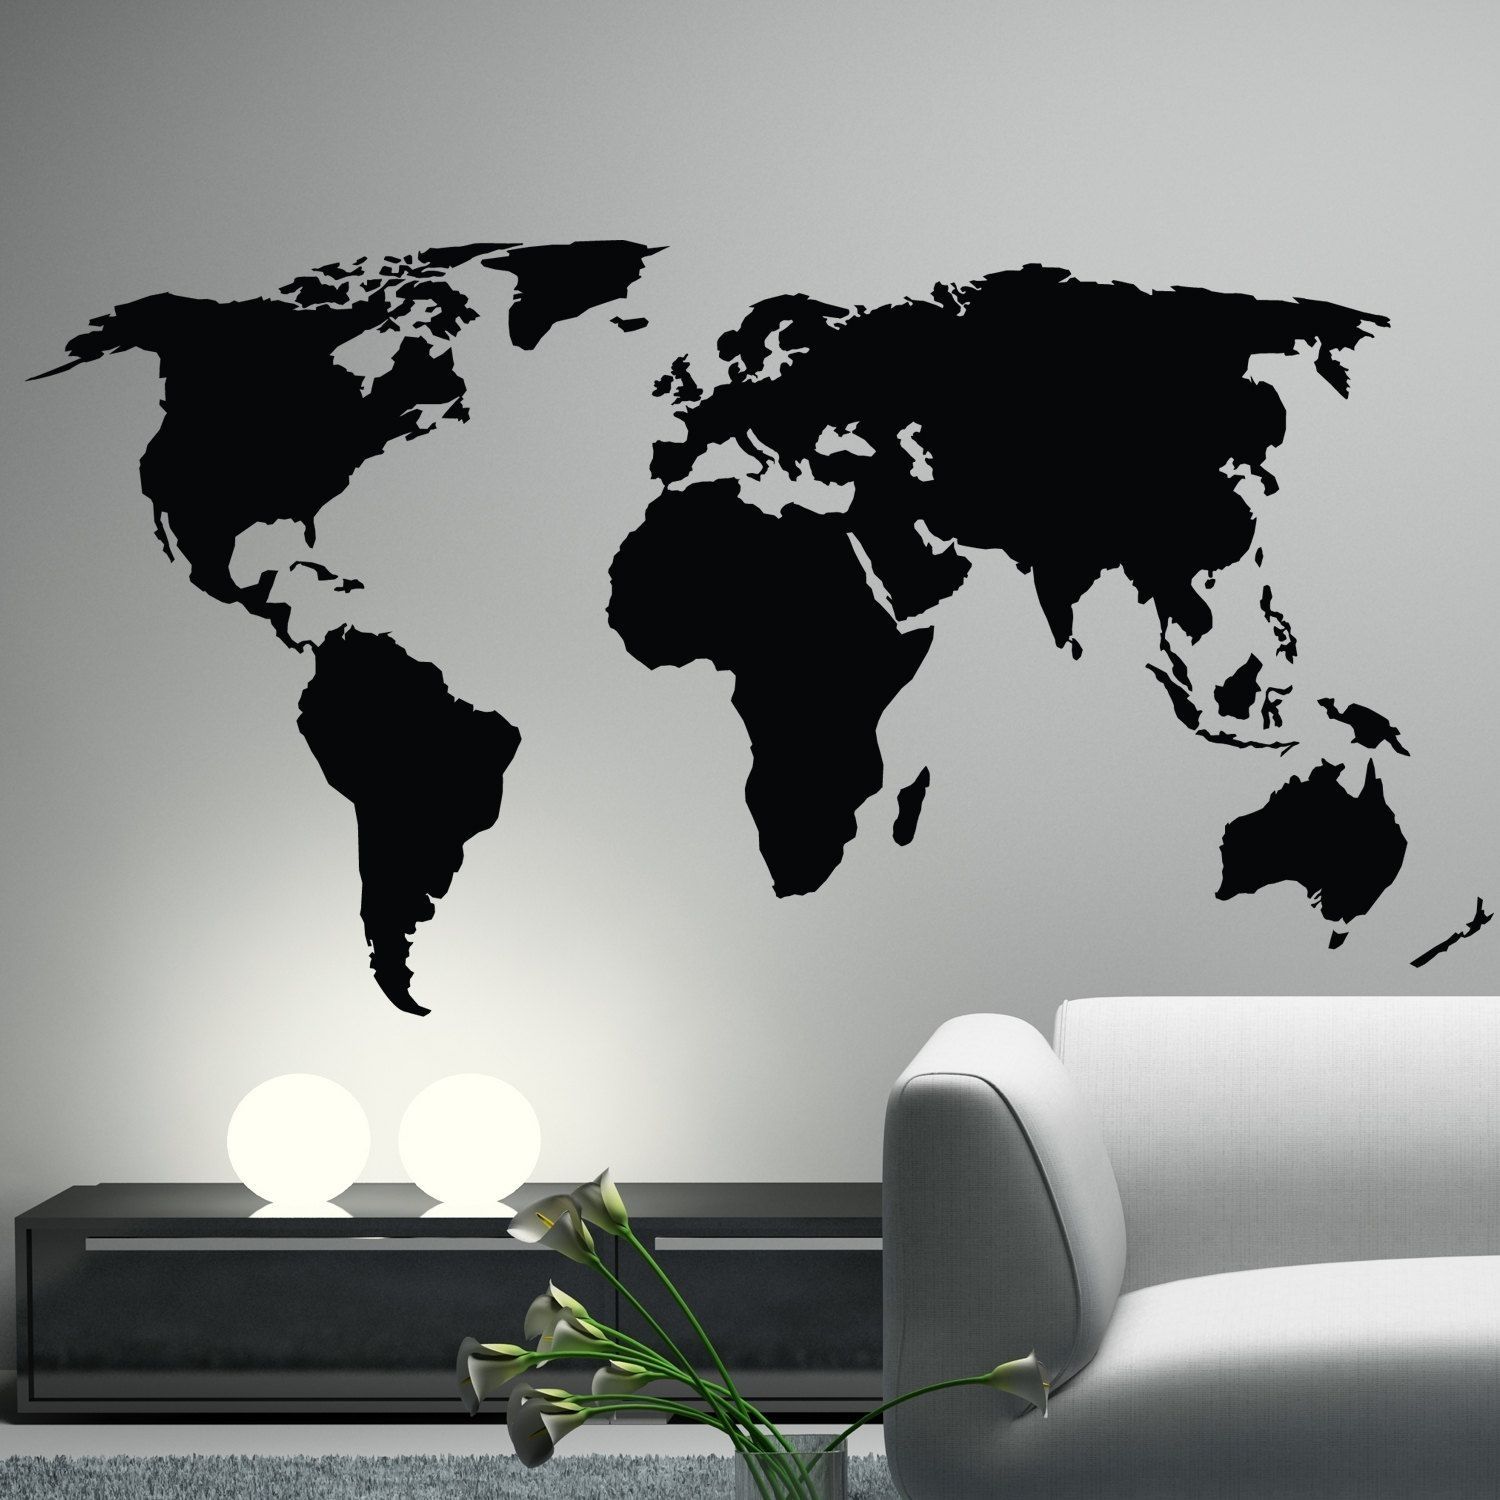 Office Decor. World Map Wall Decal Sticker World Country Atlas The Throughout Vinyl Wall Art World Map (Photo 1 of 20)